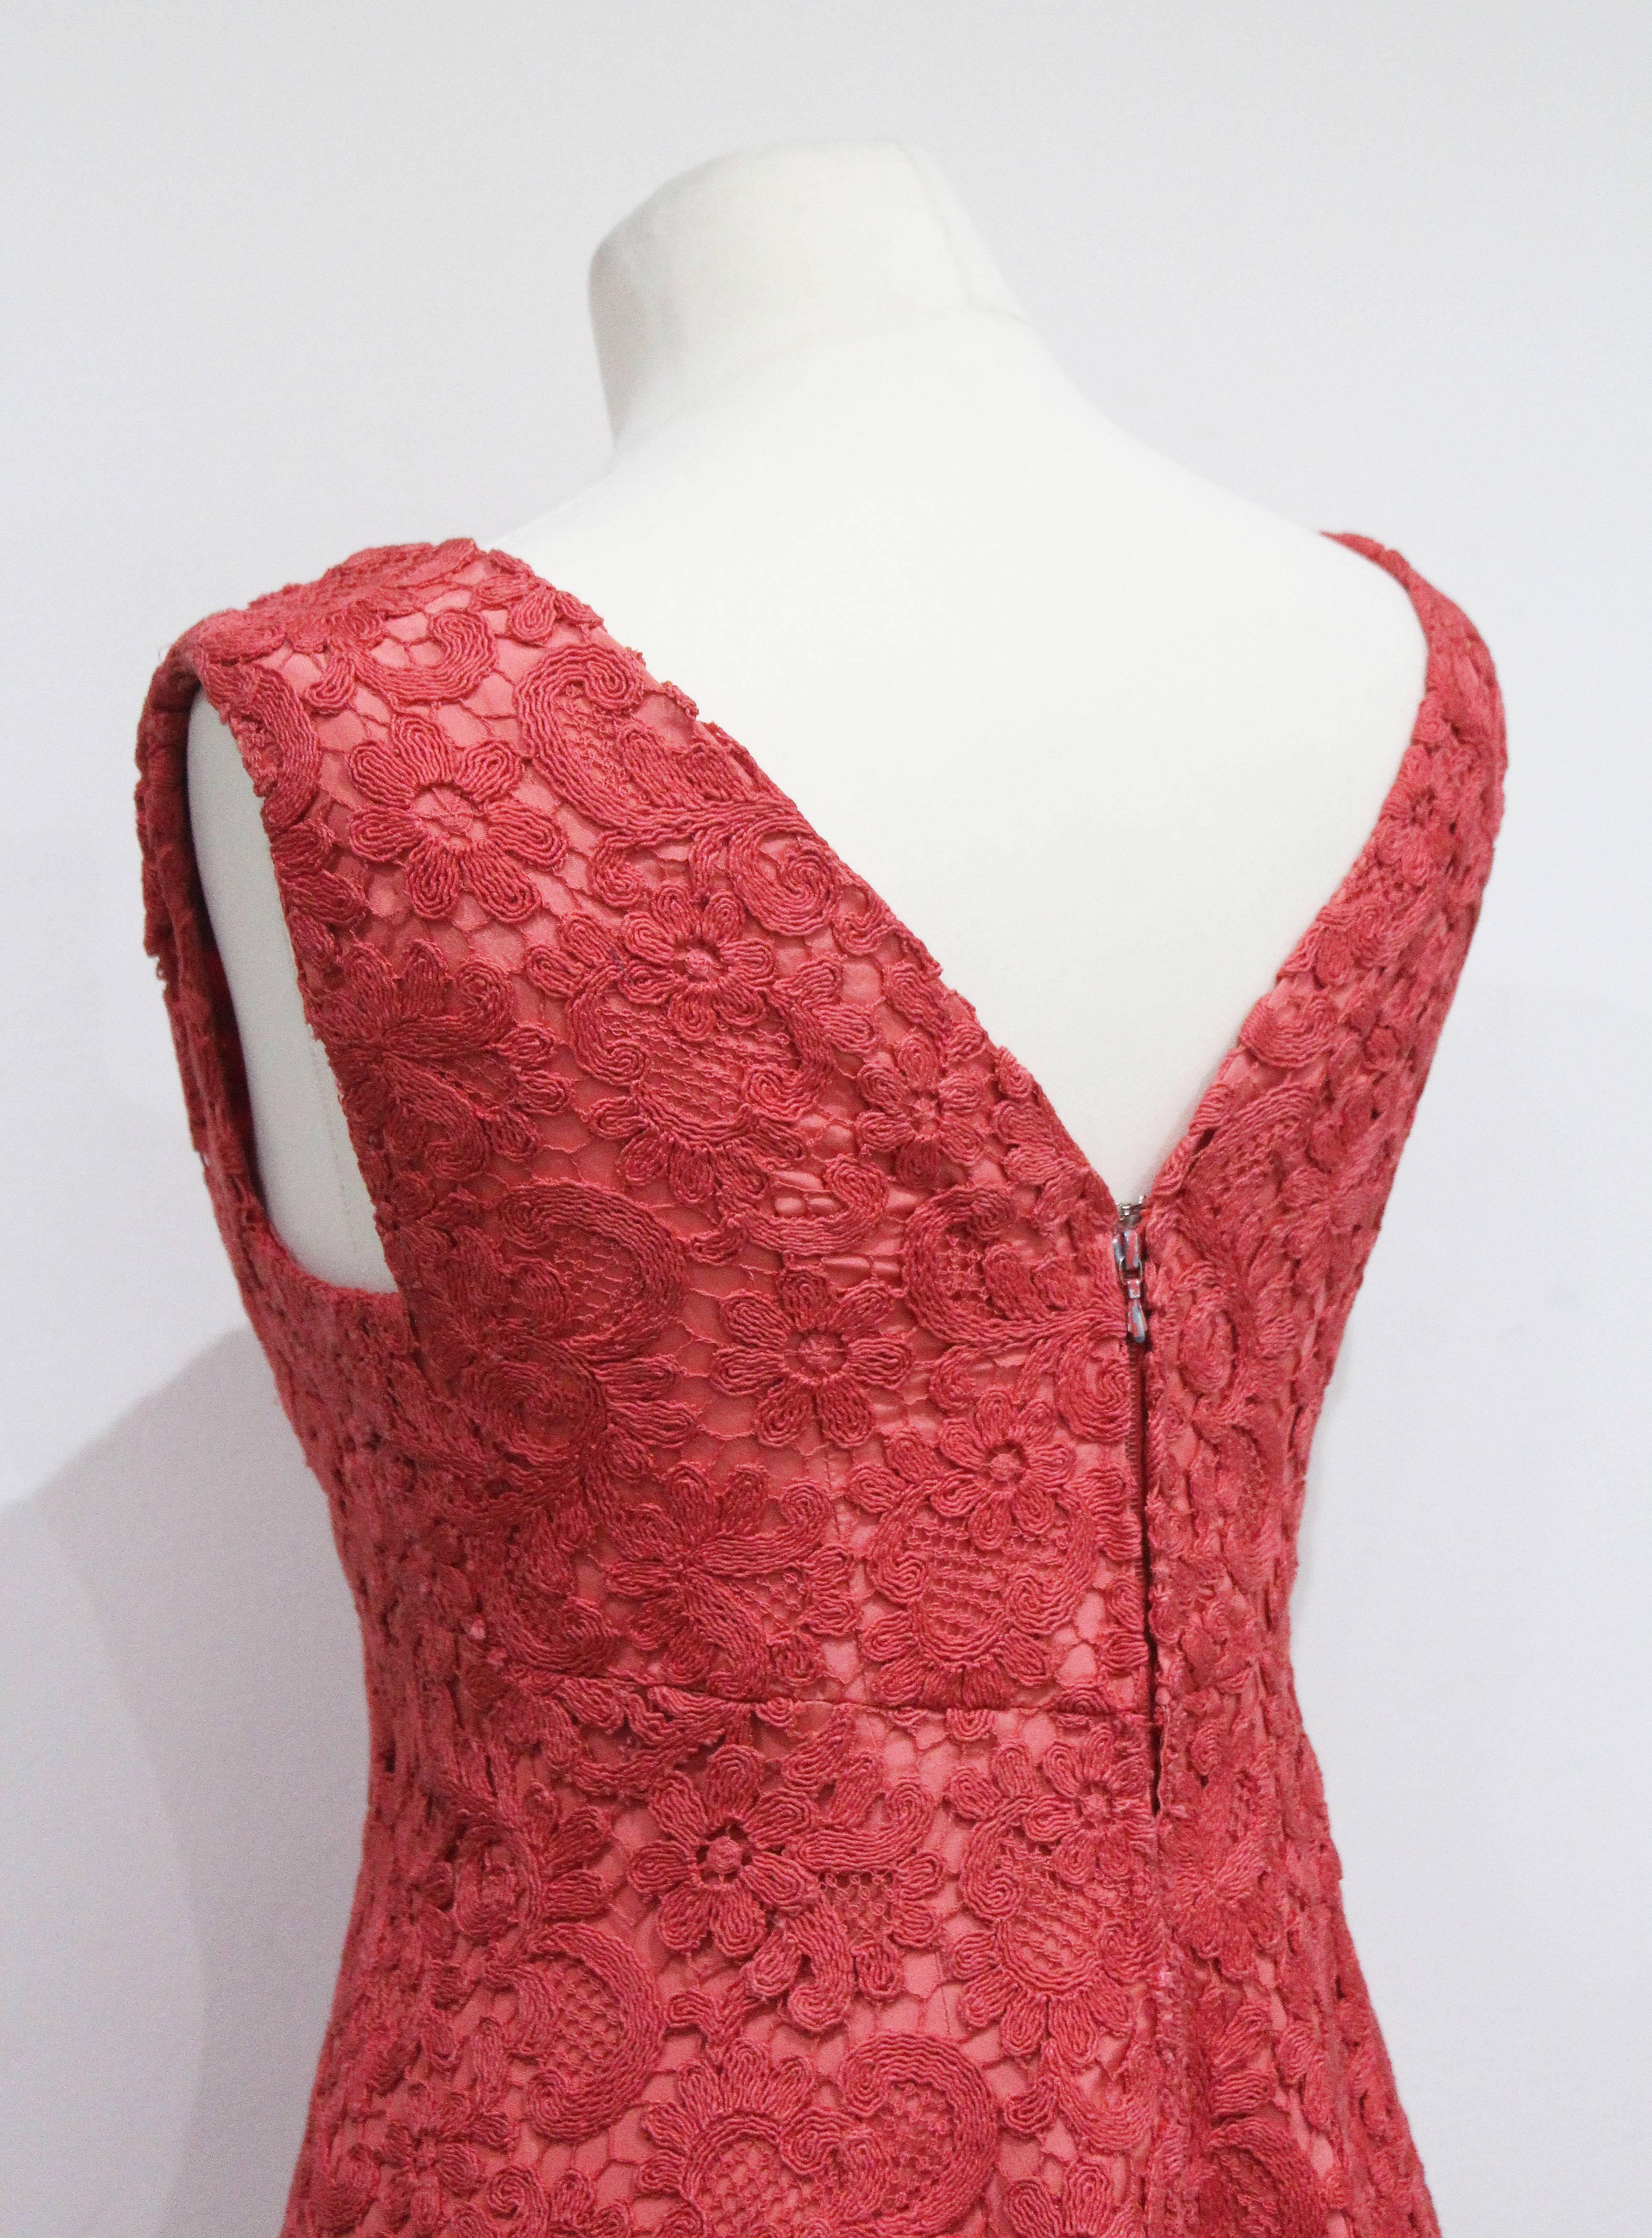 Red Rose Bertin haute couture macrame lace coral a-line dress, c. 1960s 